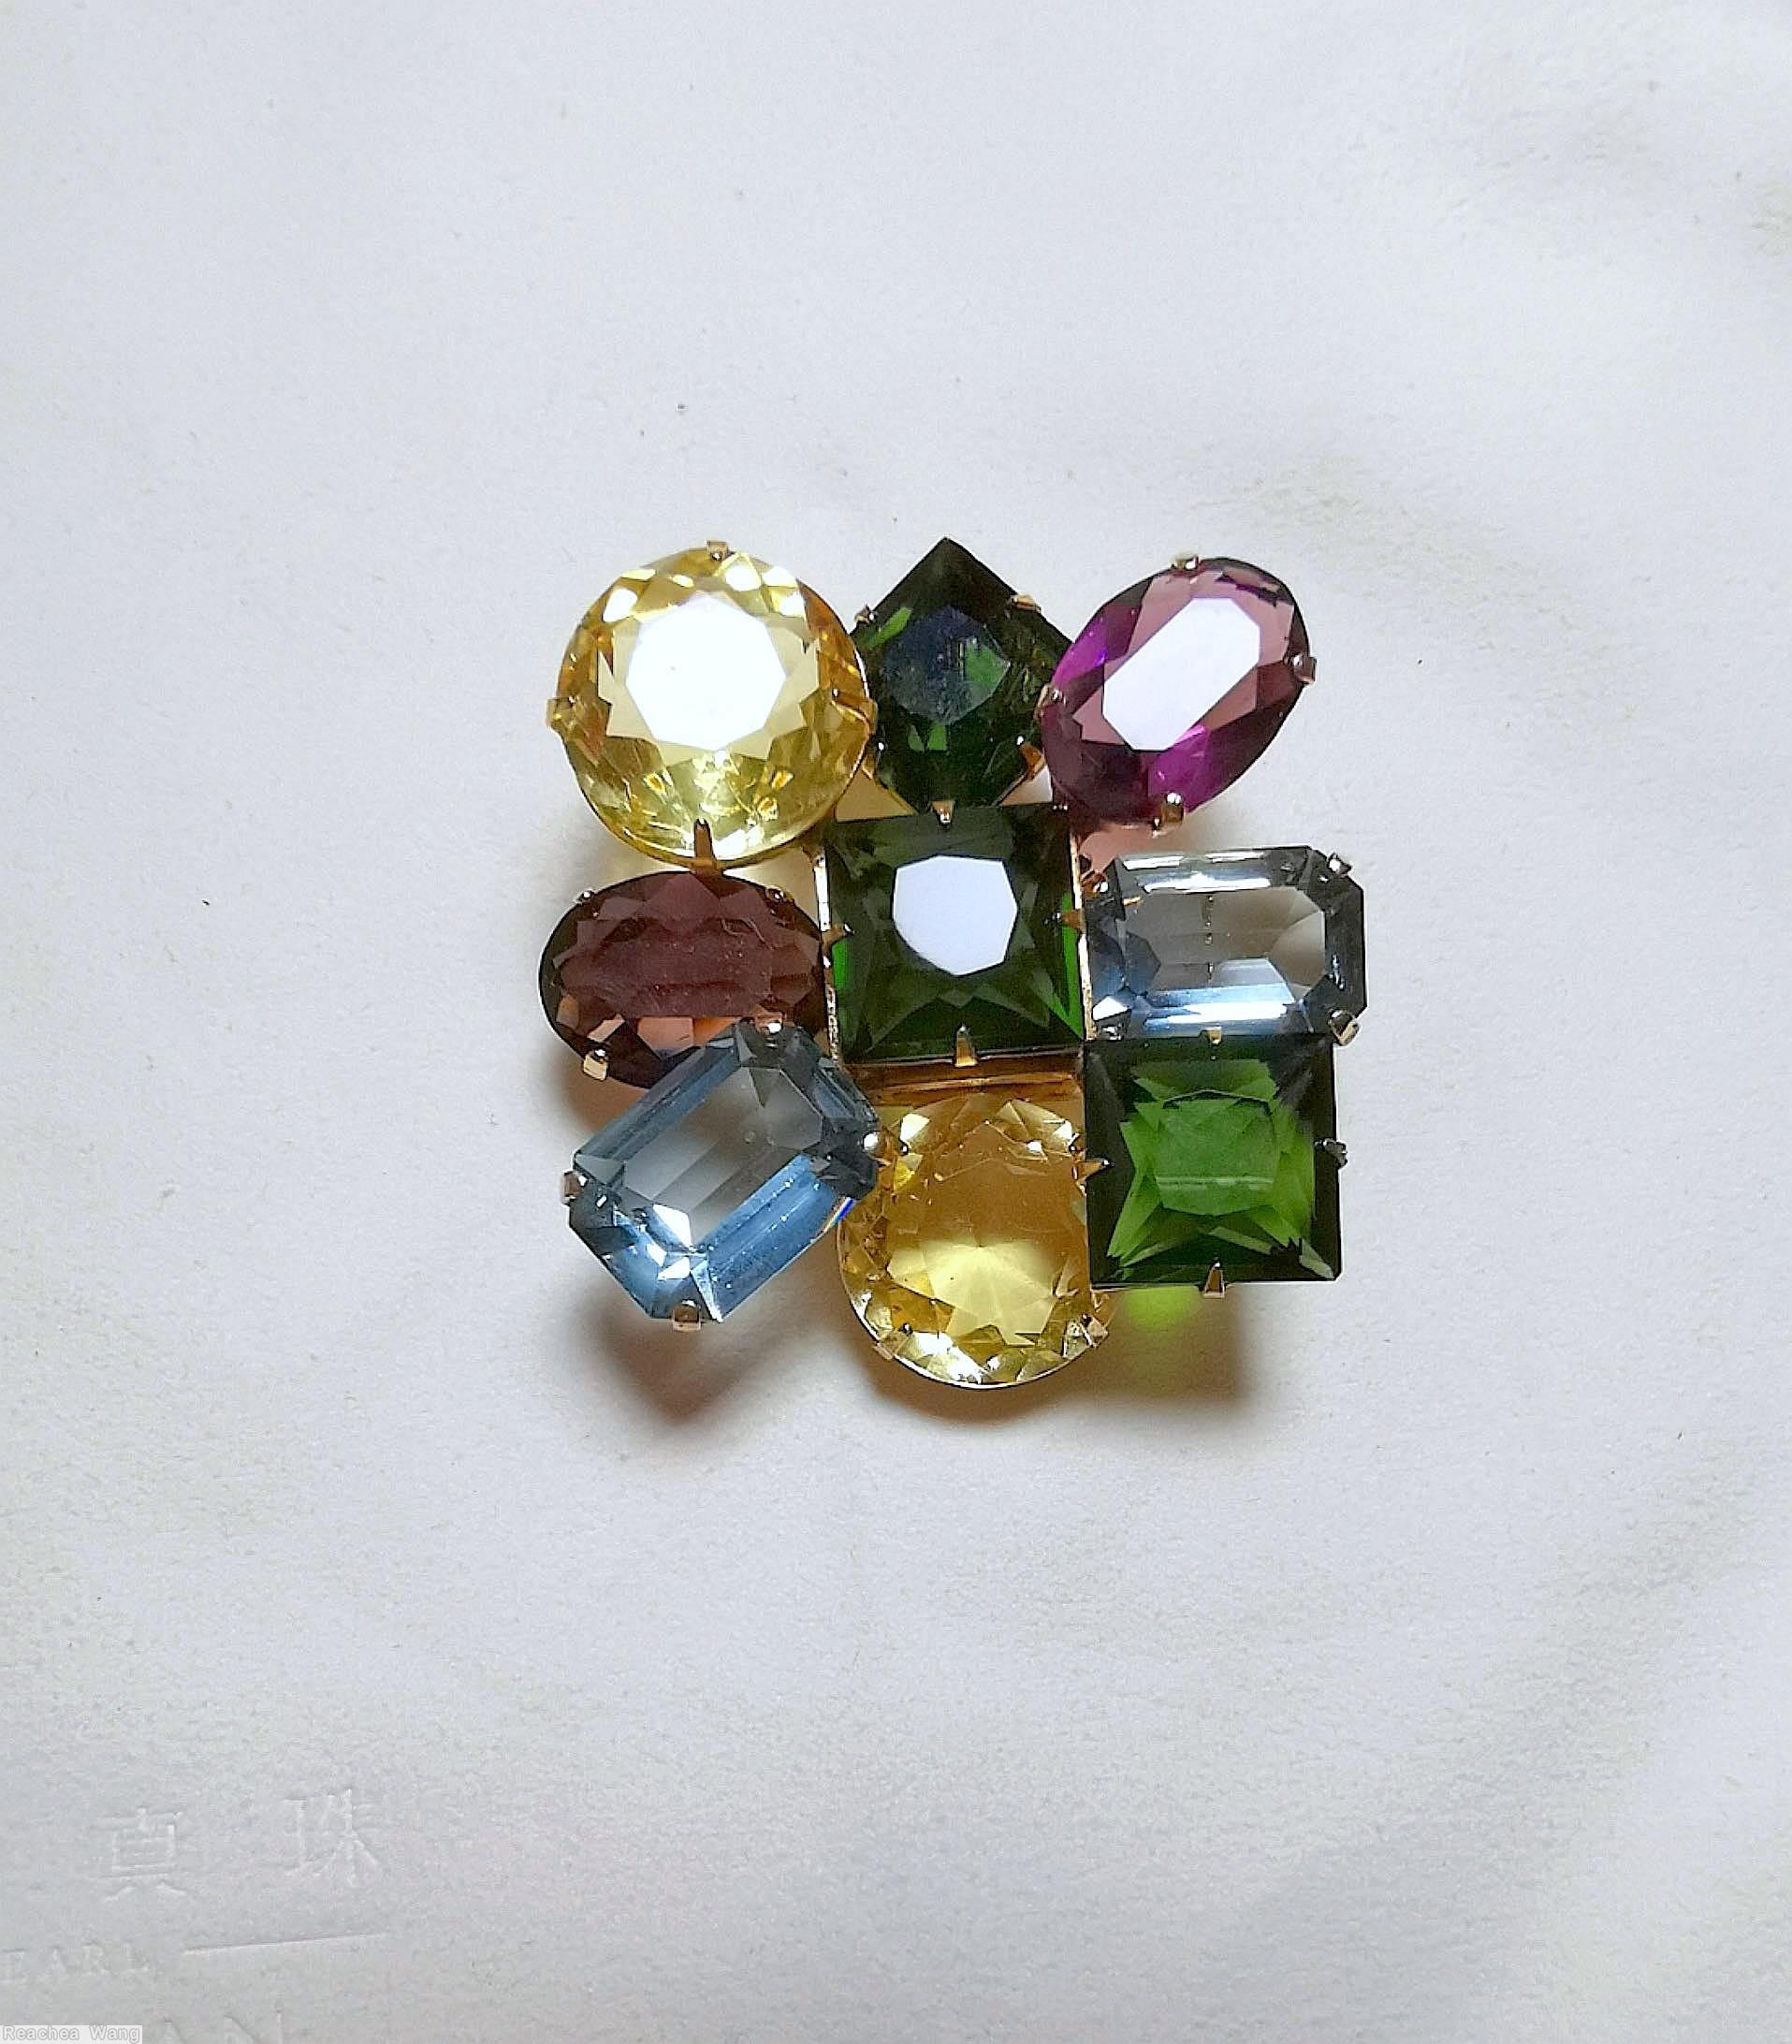 Schreiner 9 varied shape large stone square pin 3 square stone 2 chaton 2 baguette 2 teardrop purple emerald ice blue clear champagne jewelry